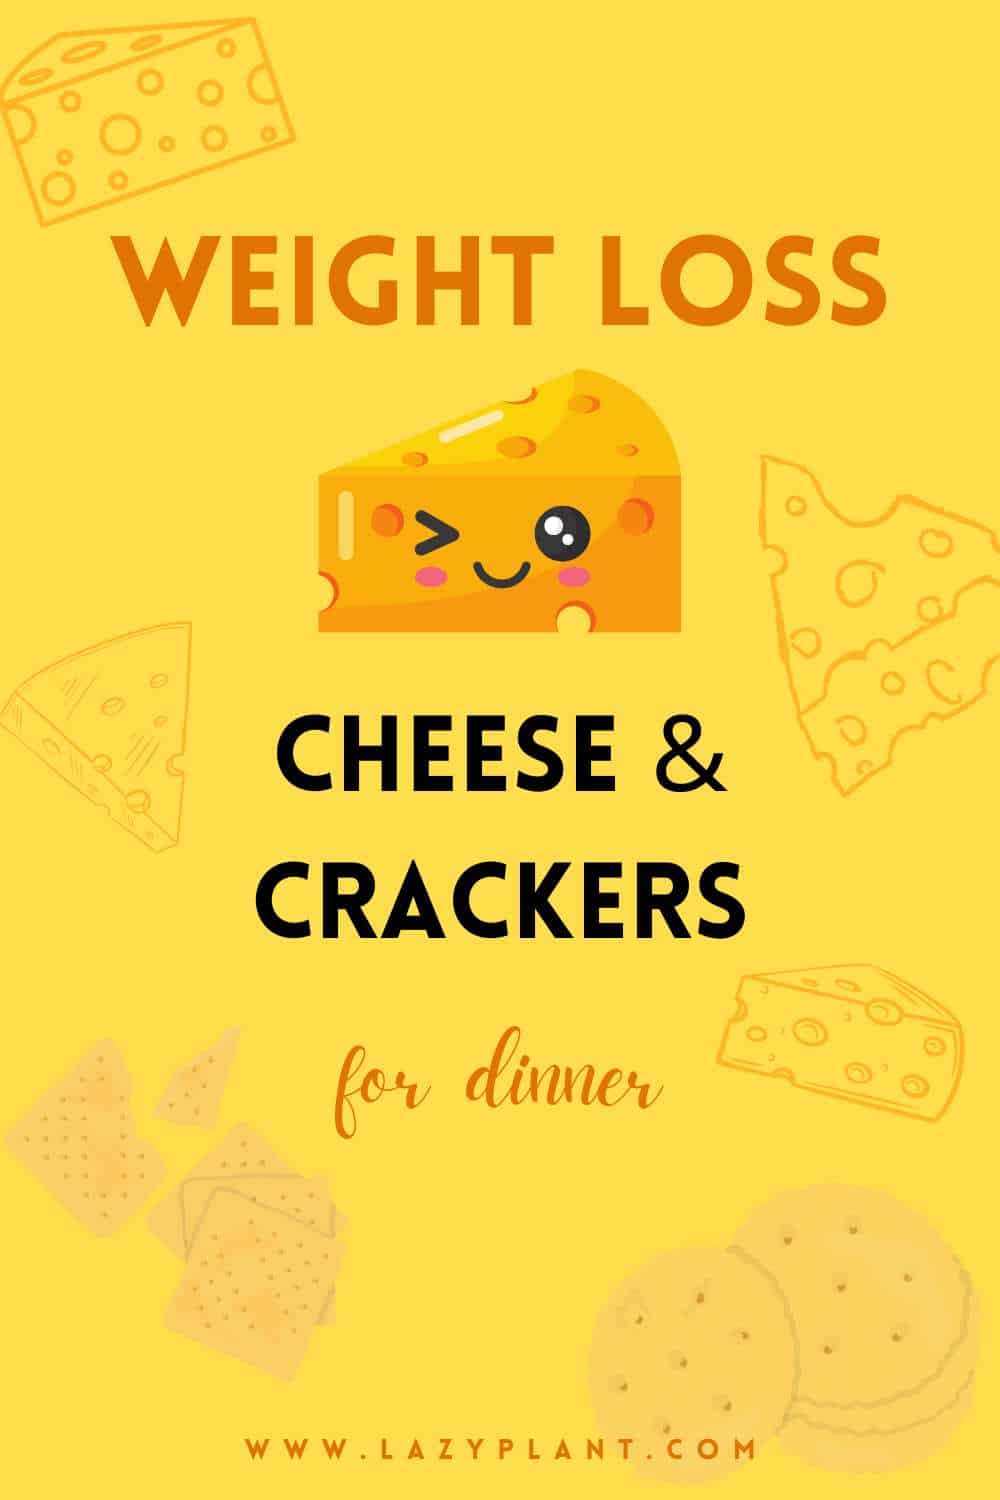 How to eat cheese and cracker before bed for weight loss?